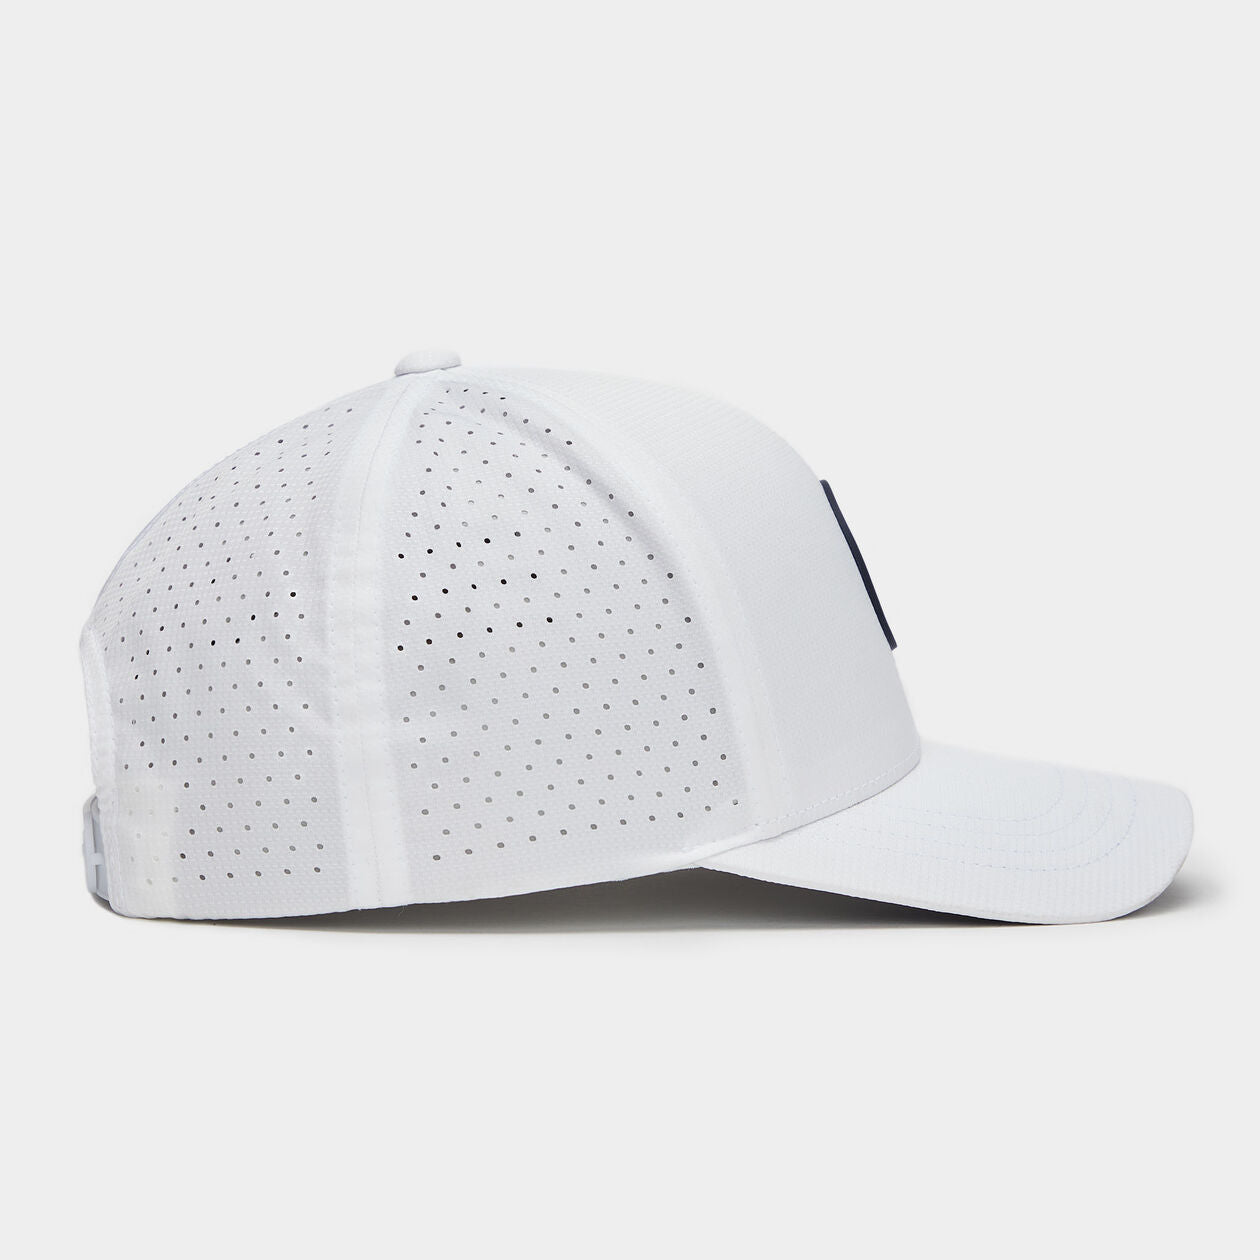 24-PERFORATED TIPPED BRIM RIPSTOP SNAPBACK HAT 高爾夫球帽